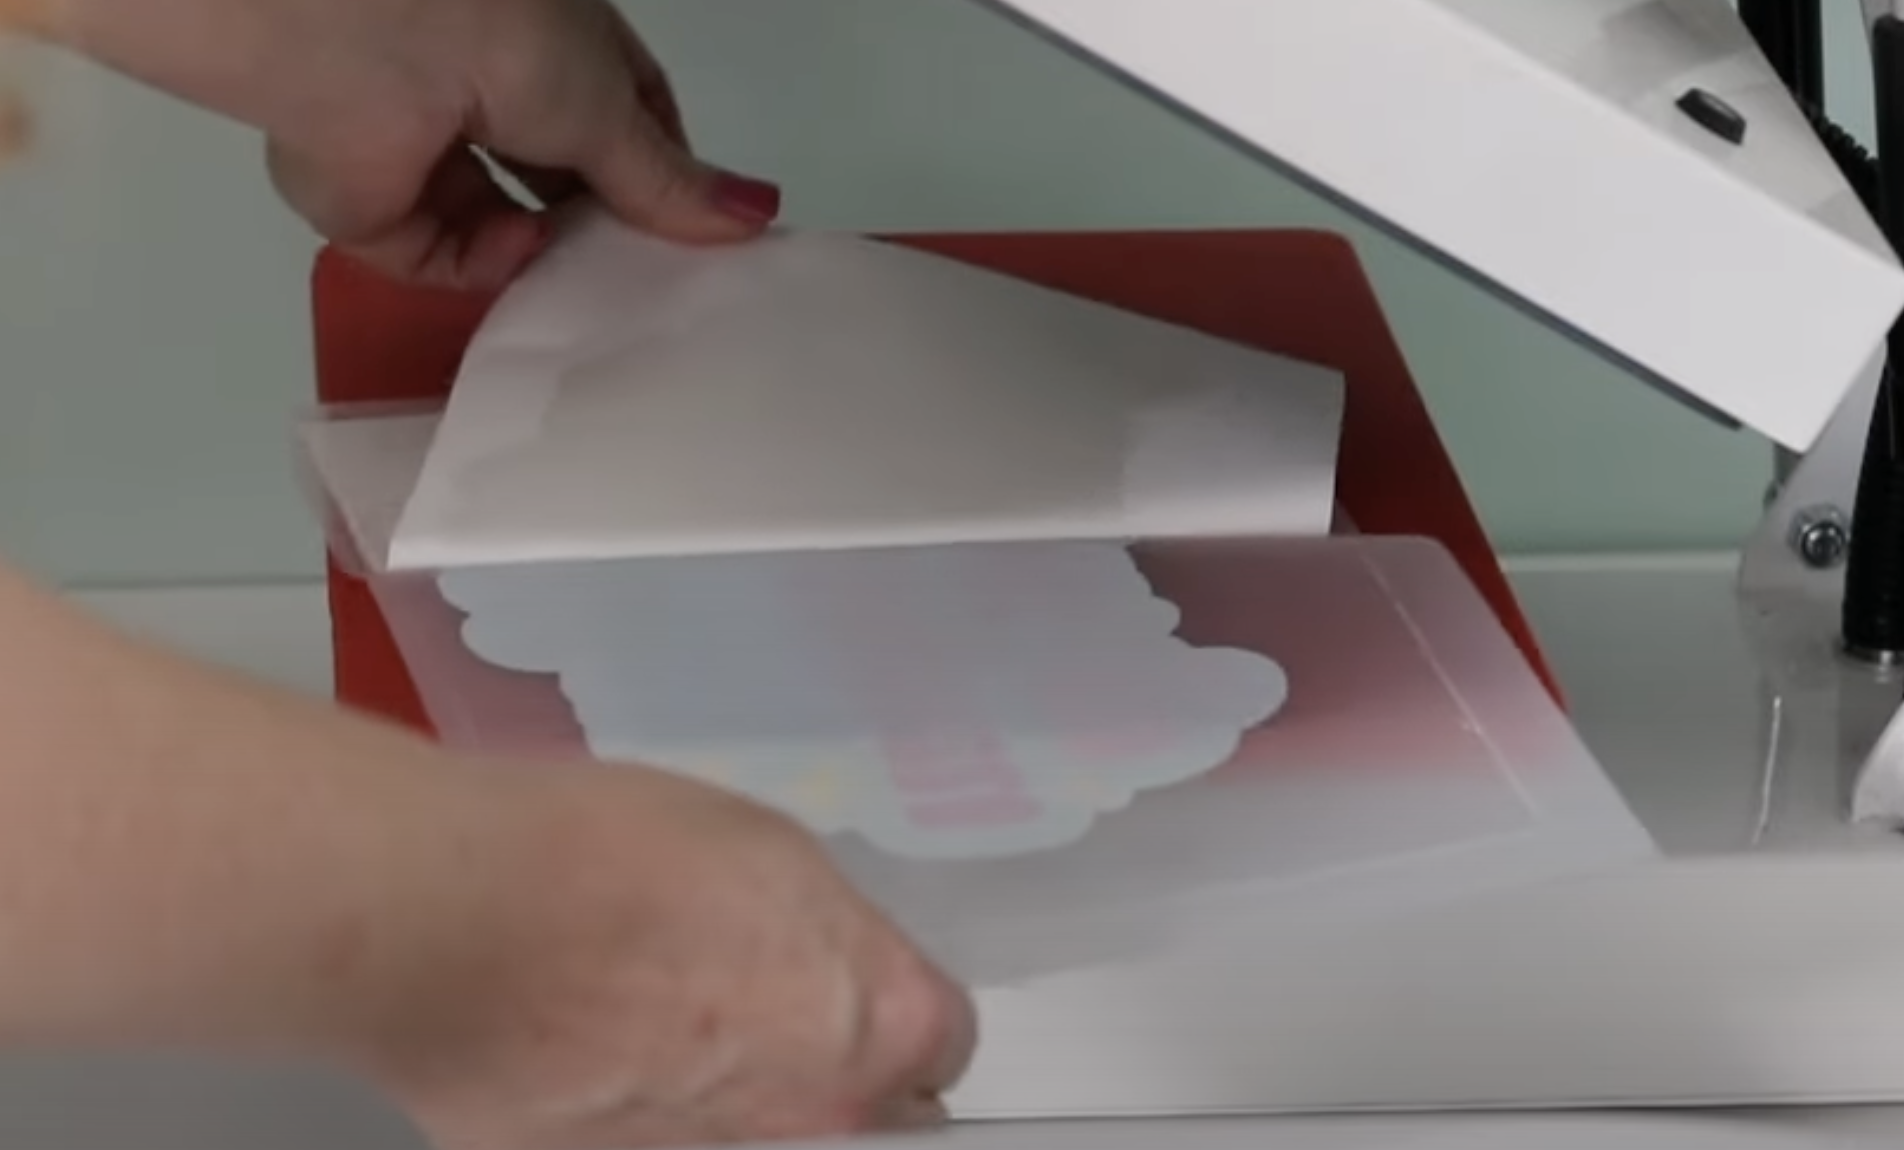 Peel back the adhesive from the print.